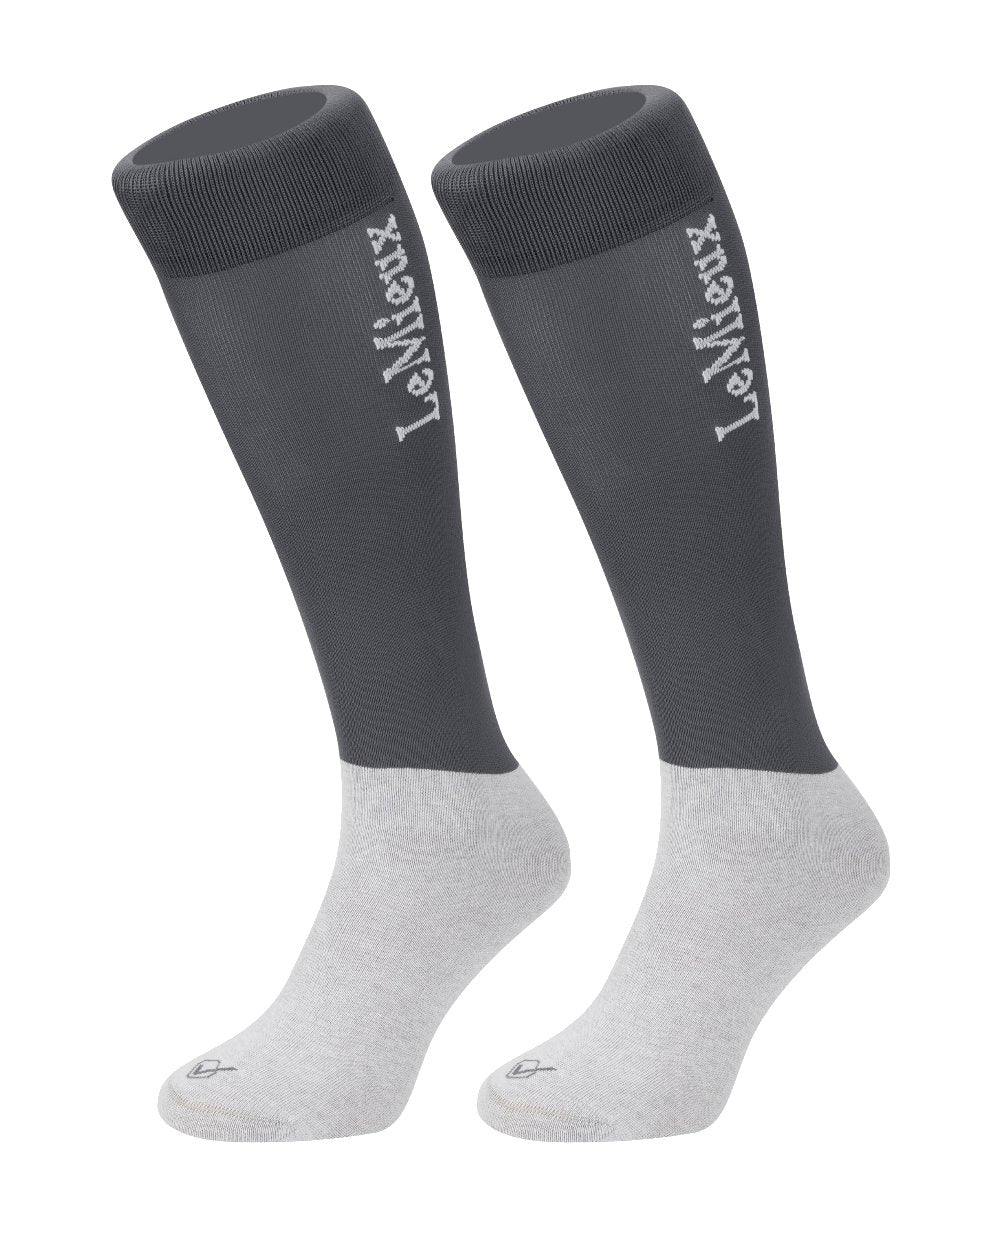 Grey coloured LeMieux Competition Socks (Twin Pack) on white background 